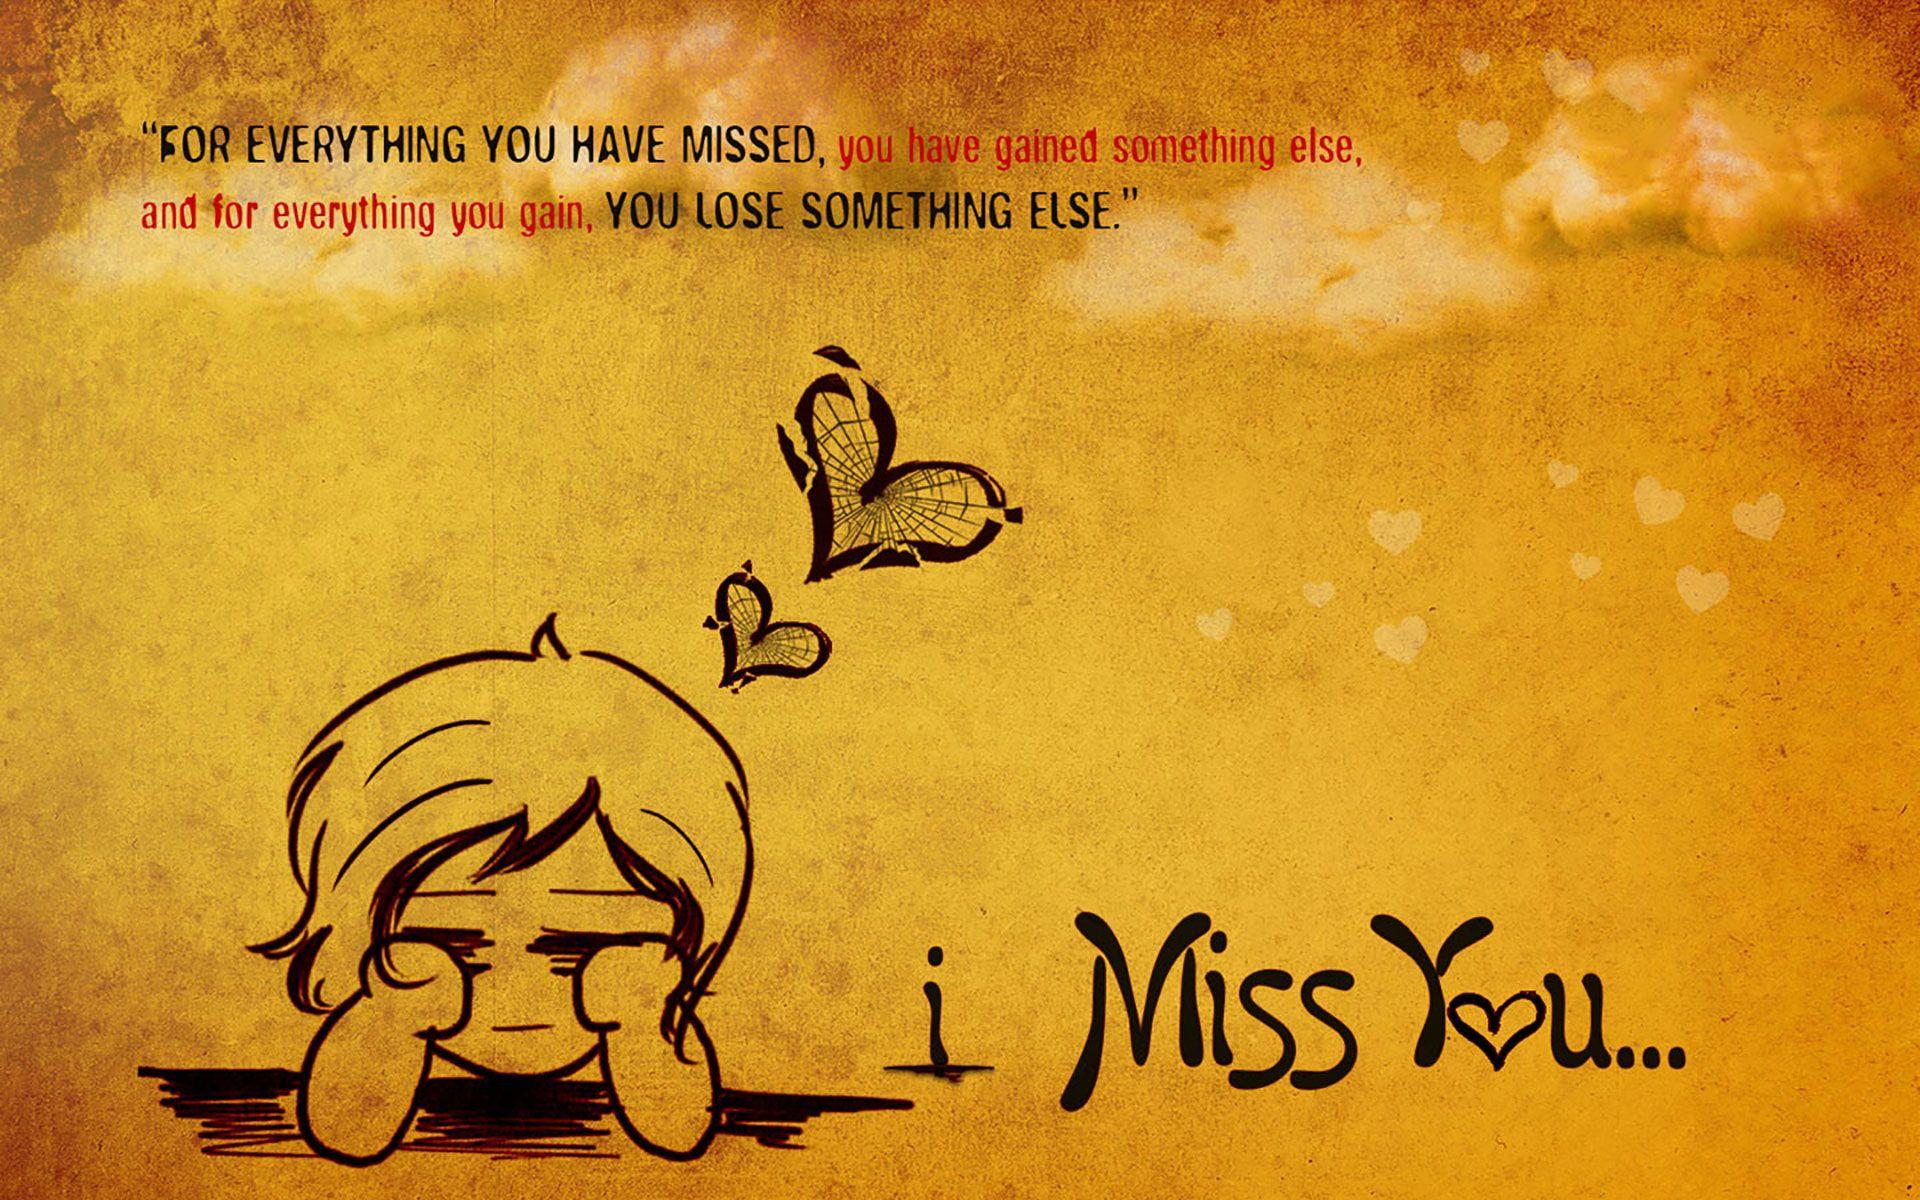 HD I Miss You Wallpaper for him or her. Romantic Wallpaper